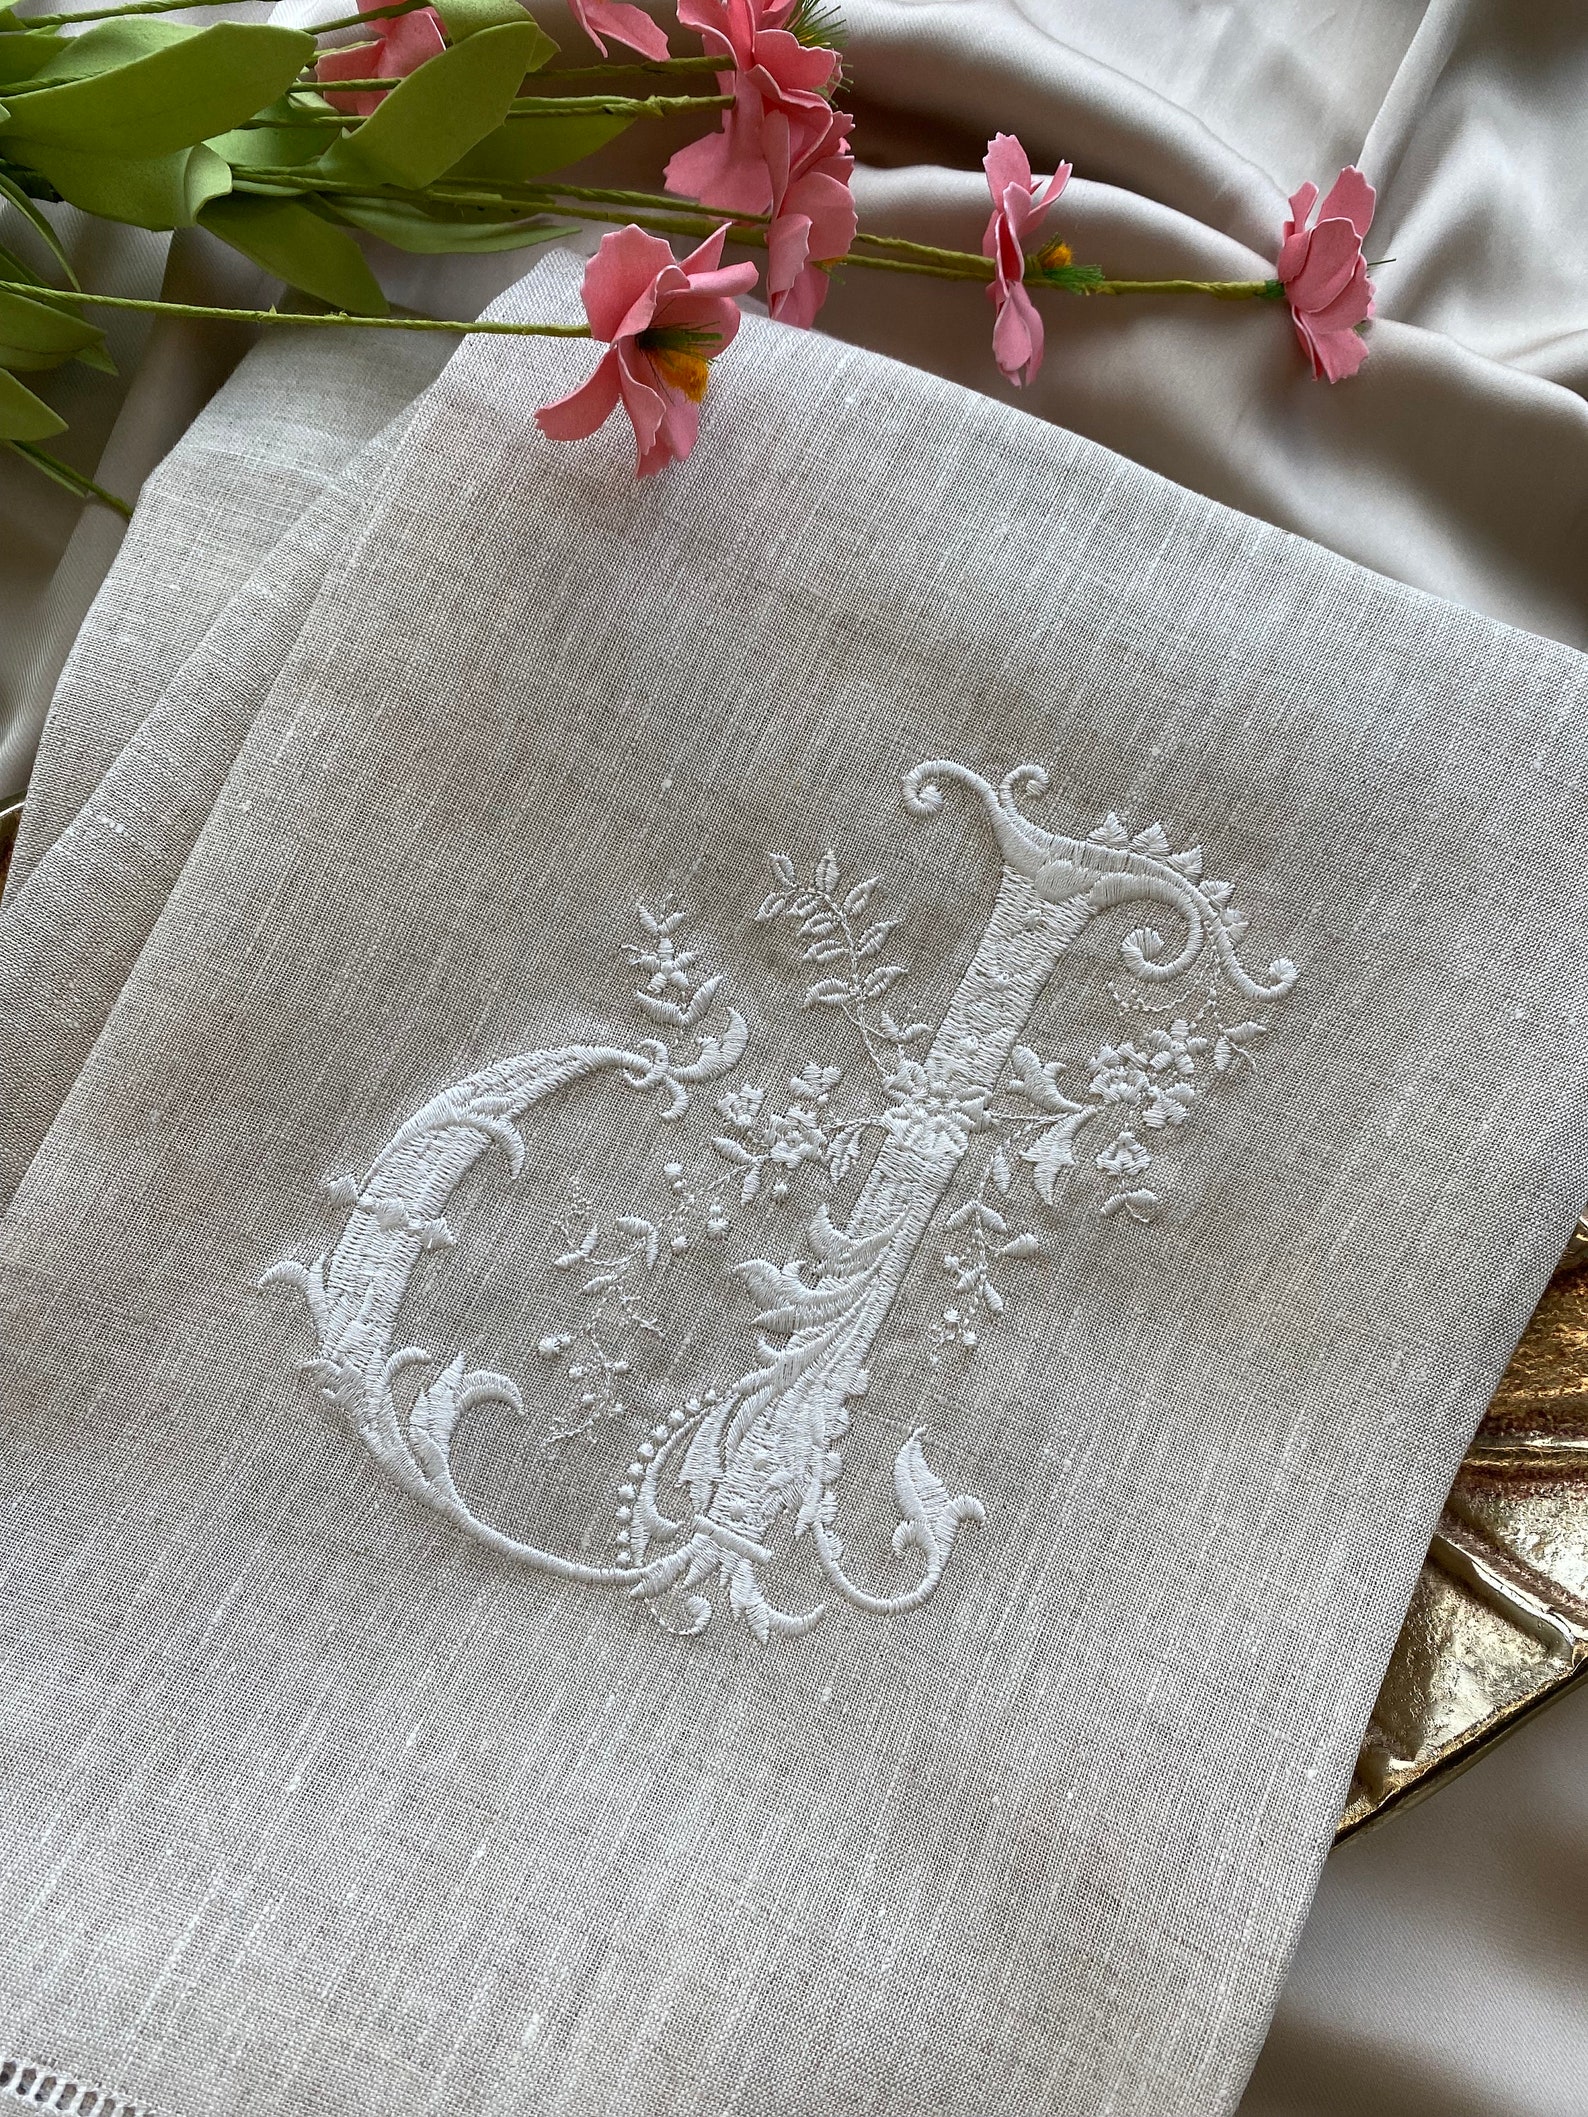 French Style Embroidered Monogrammed Linen Guest Towels by JkafieStudio